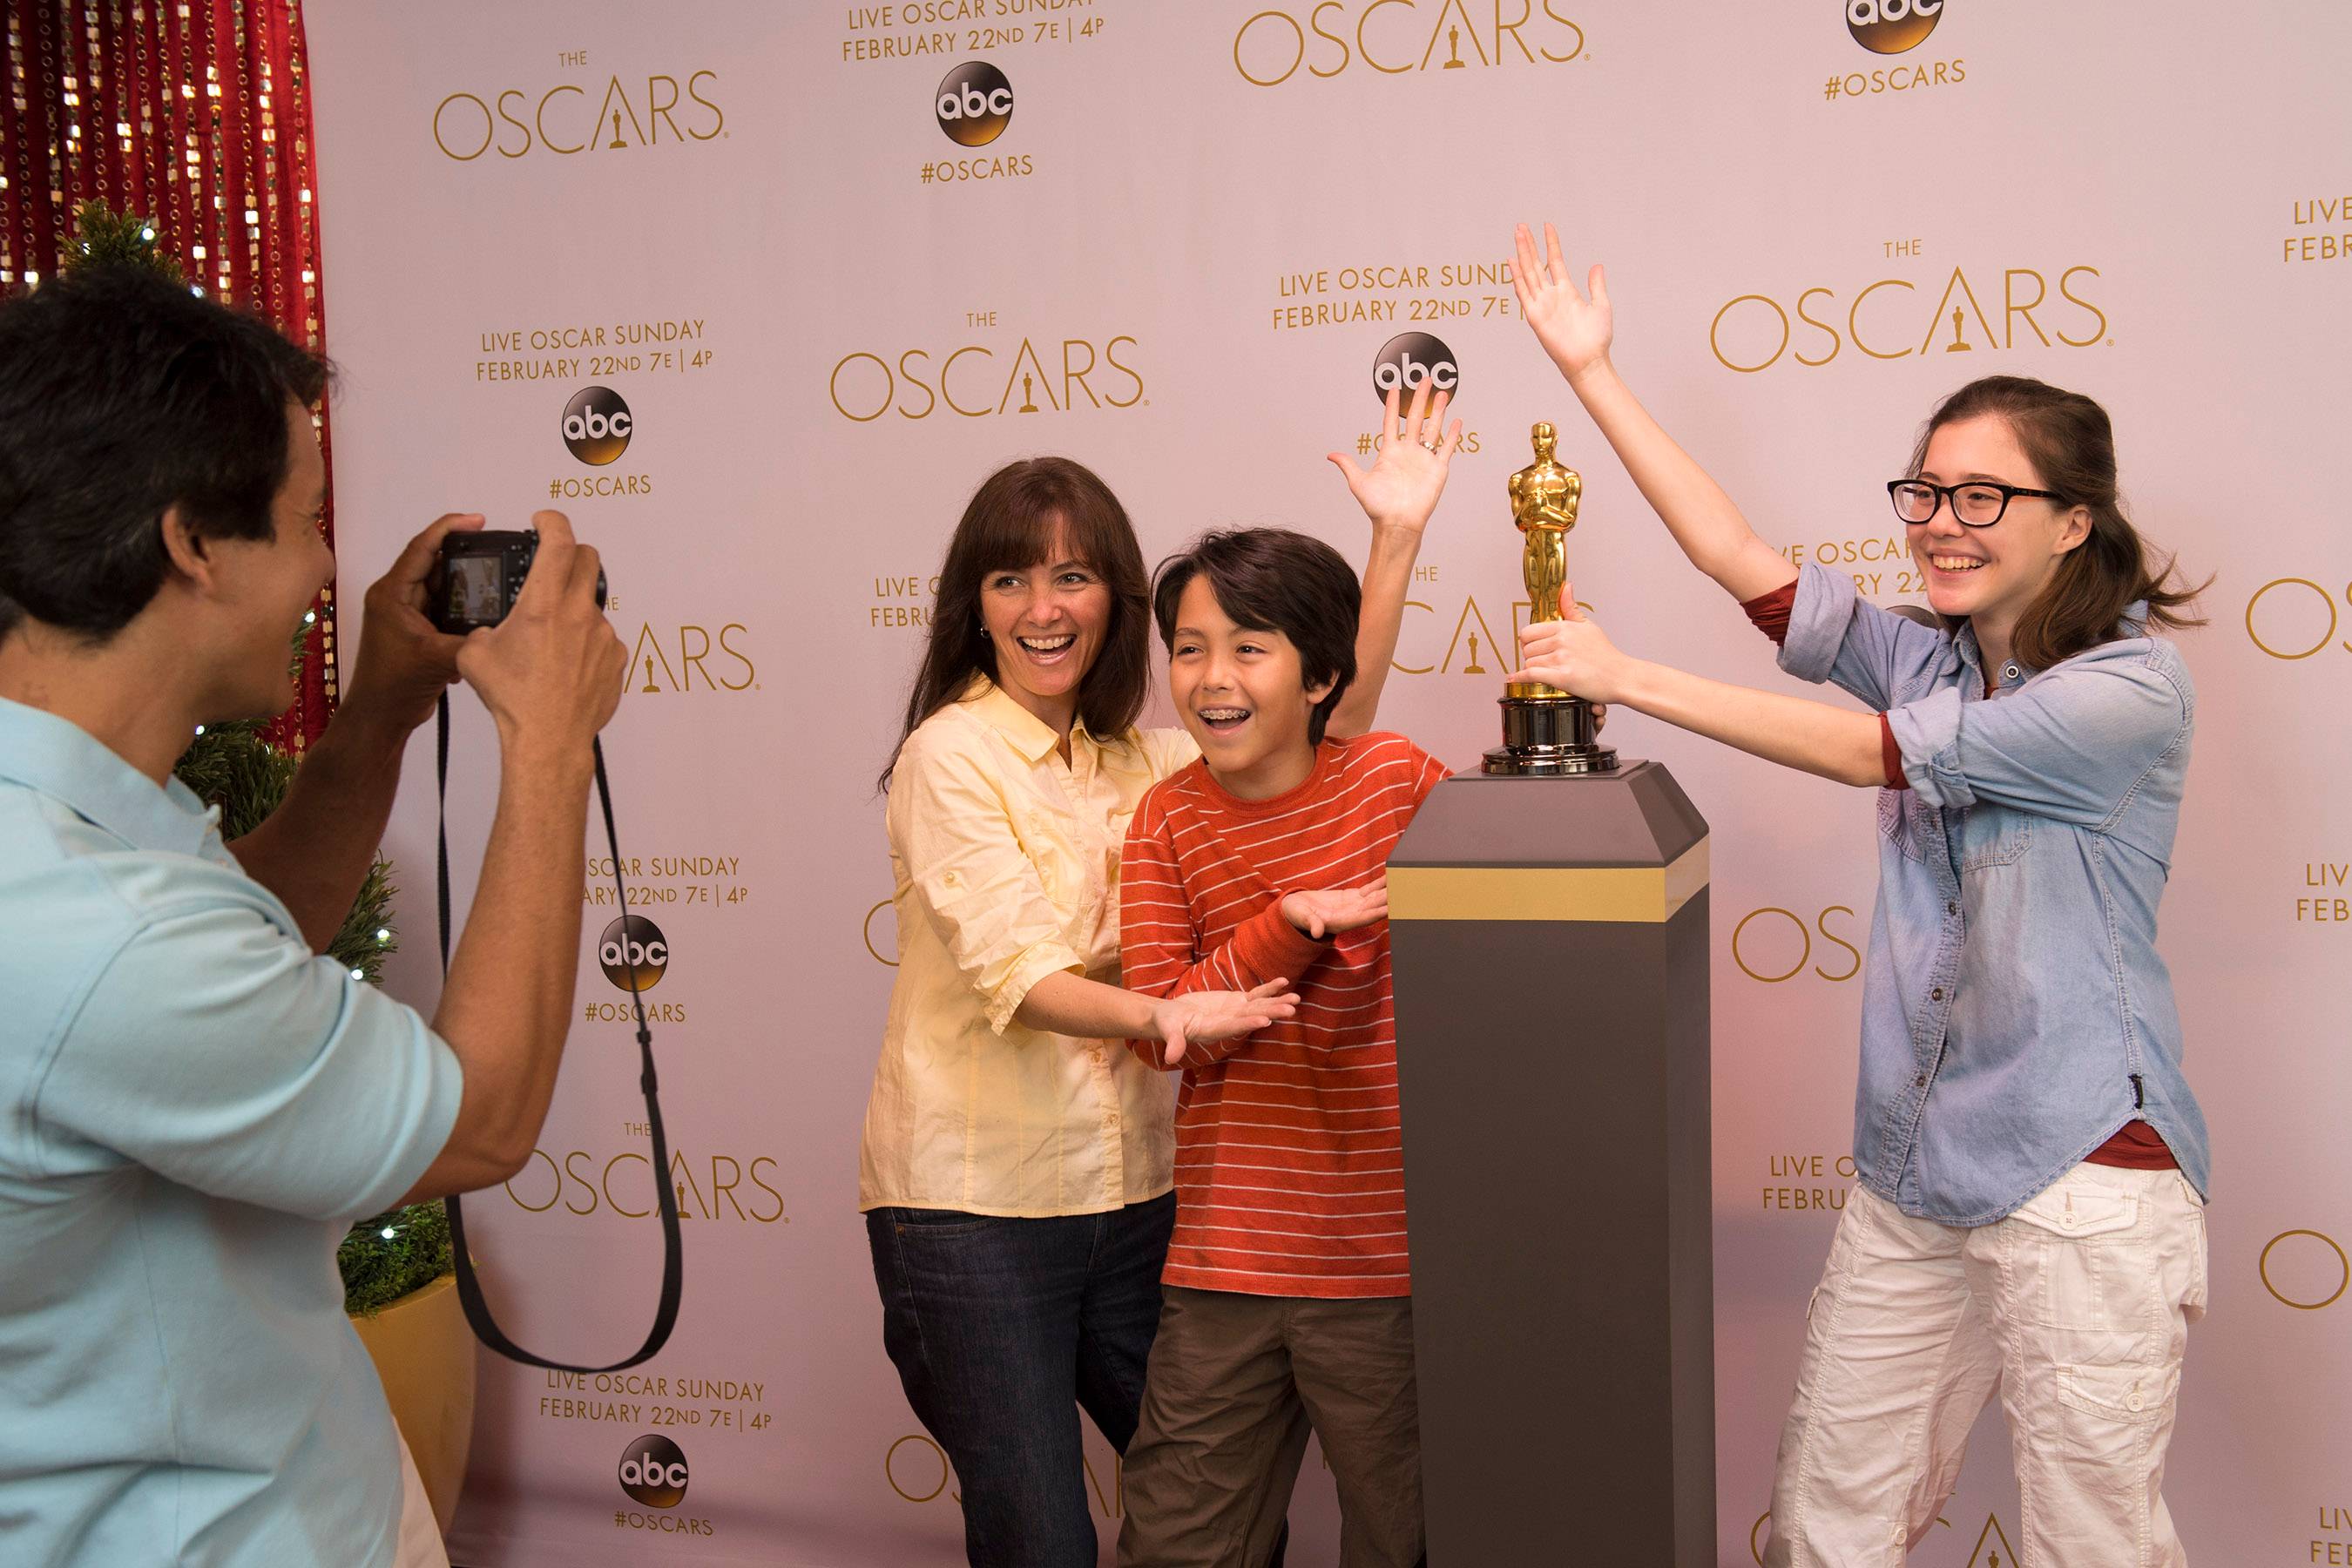 PHOTO - Your chance to pose with an Oscar at Disney's Hollywood Studios this week